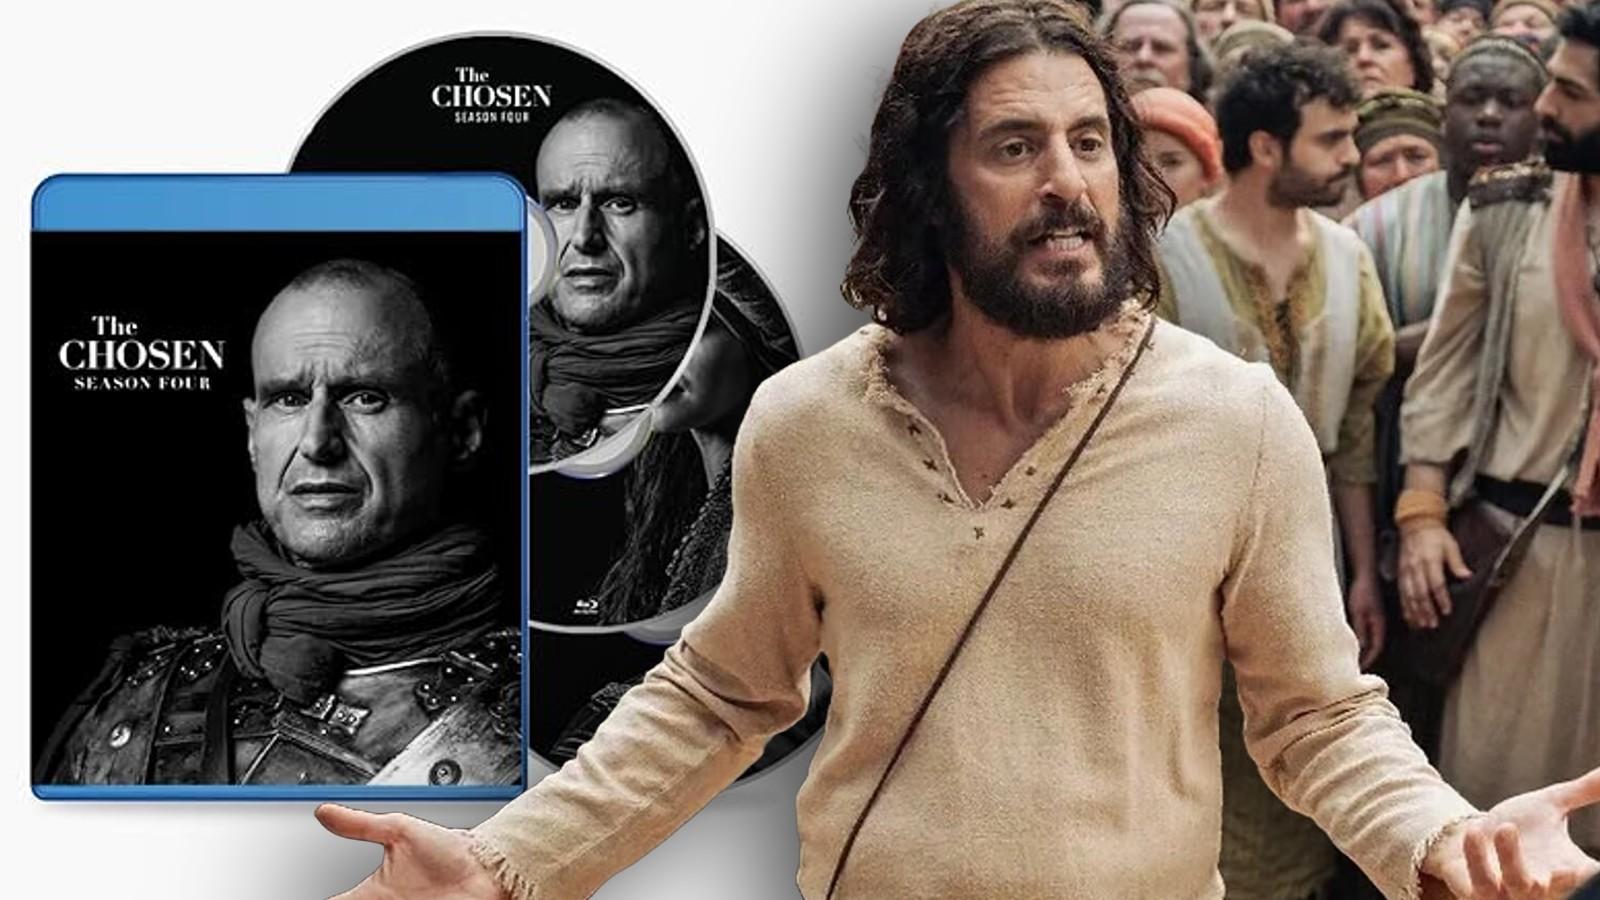 Jonathan Roumie as Jesus in The Chosen and the Season 4 Blu-ray